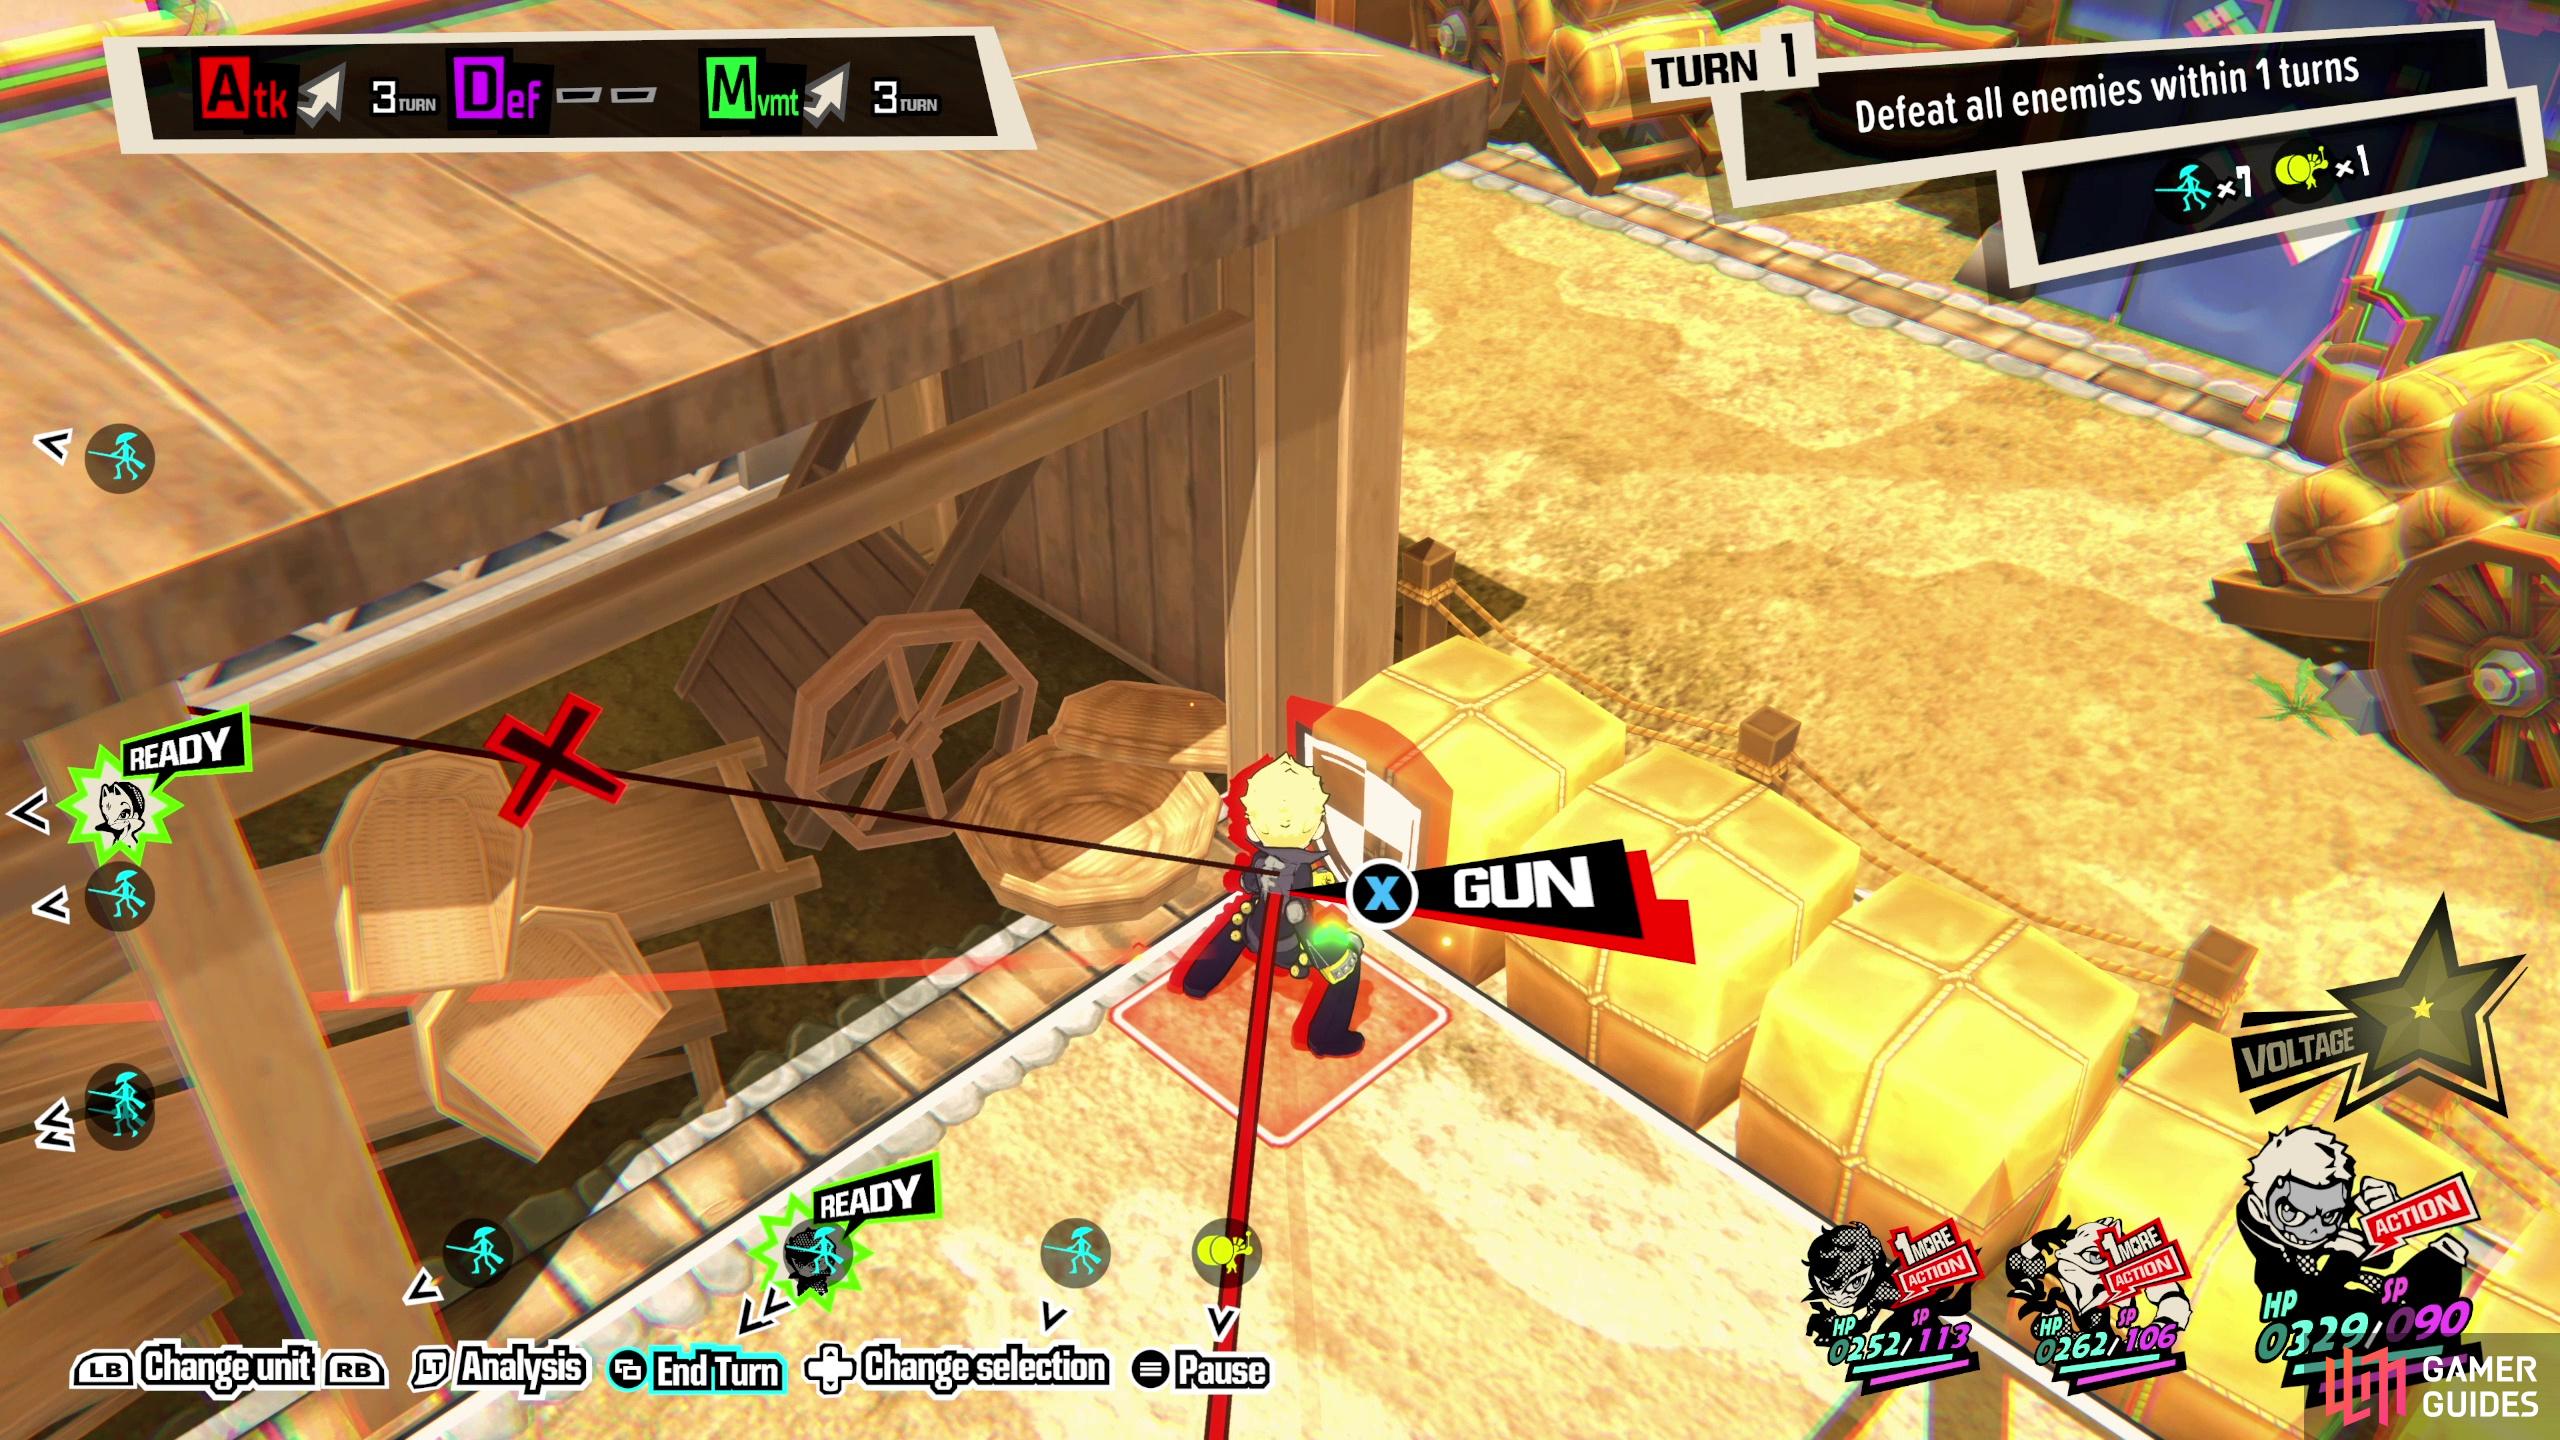 the move Ryuji to the far left corner of the map.